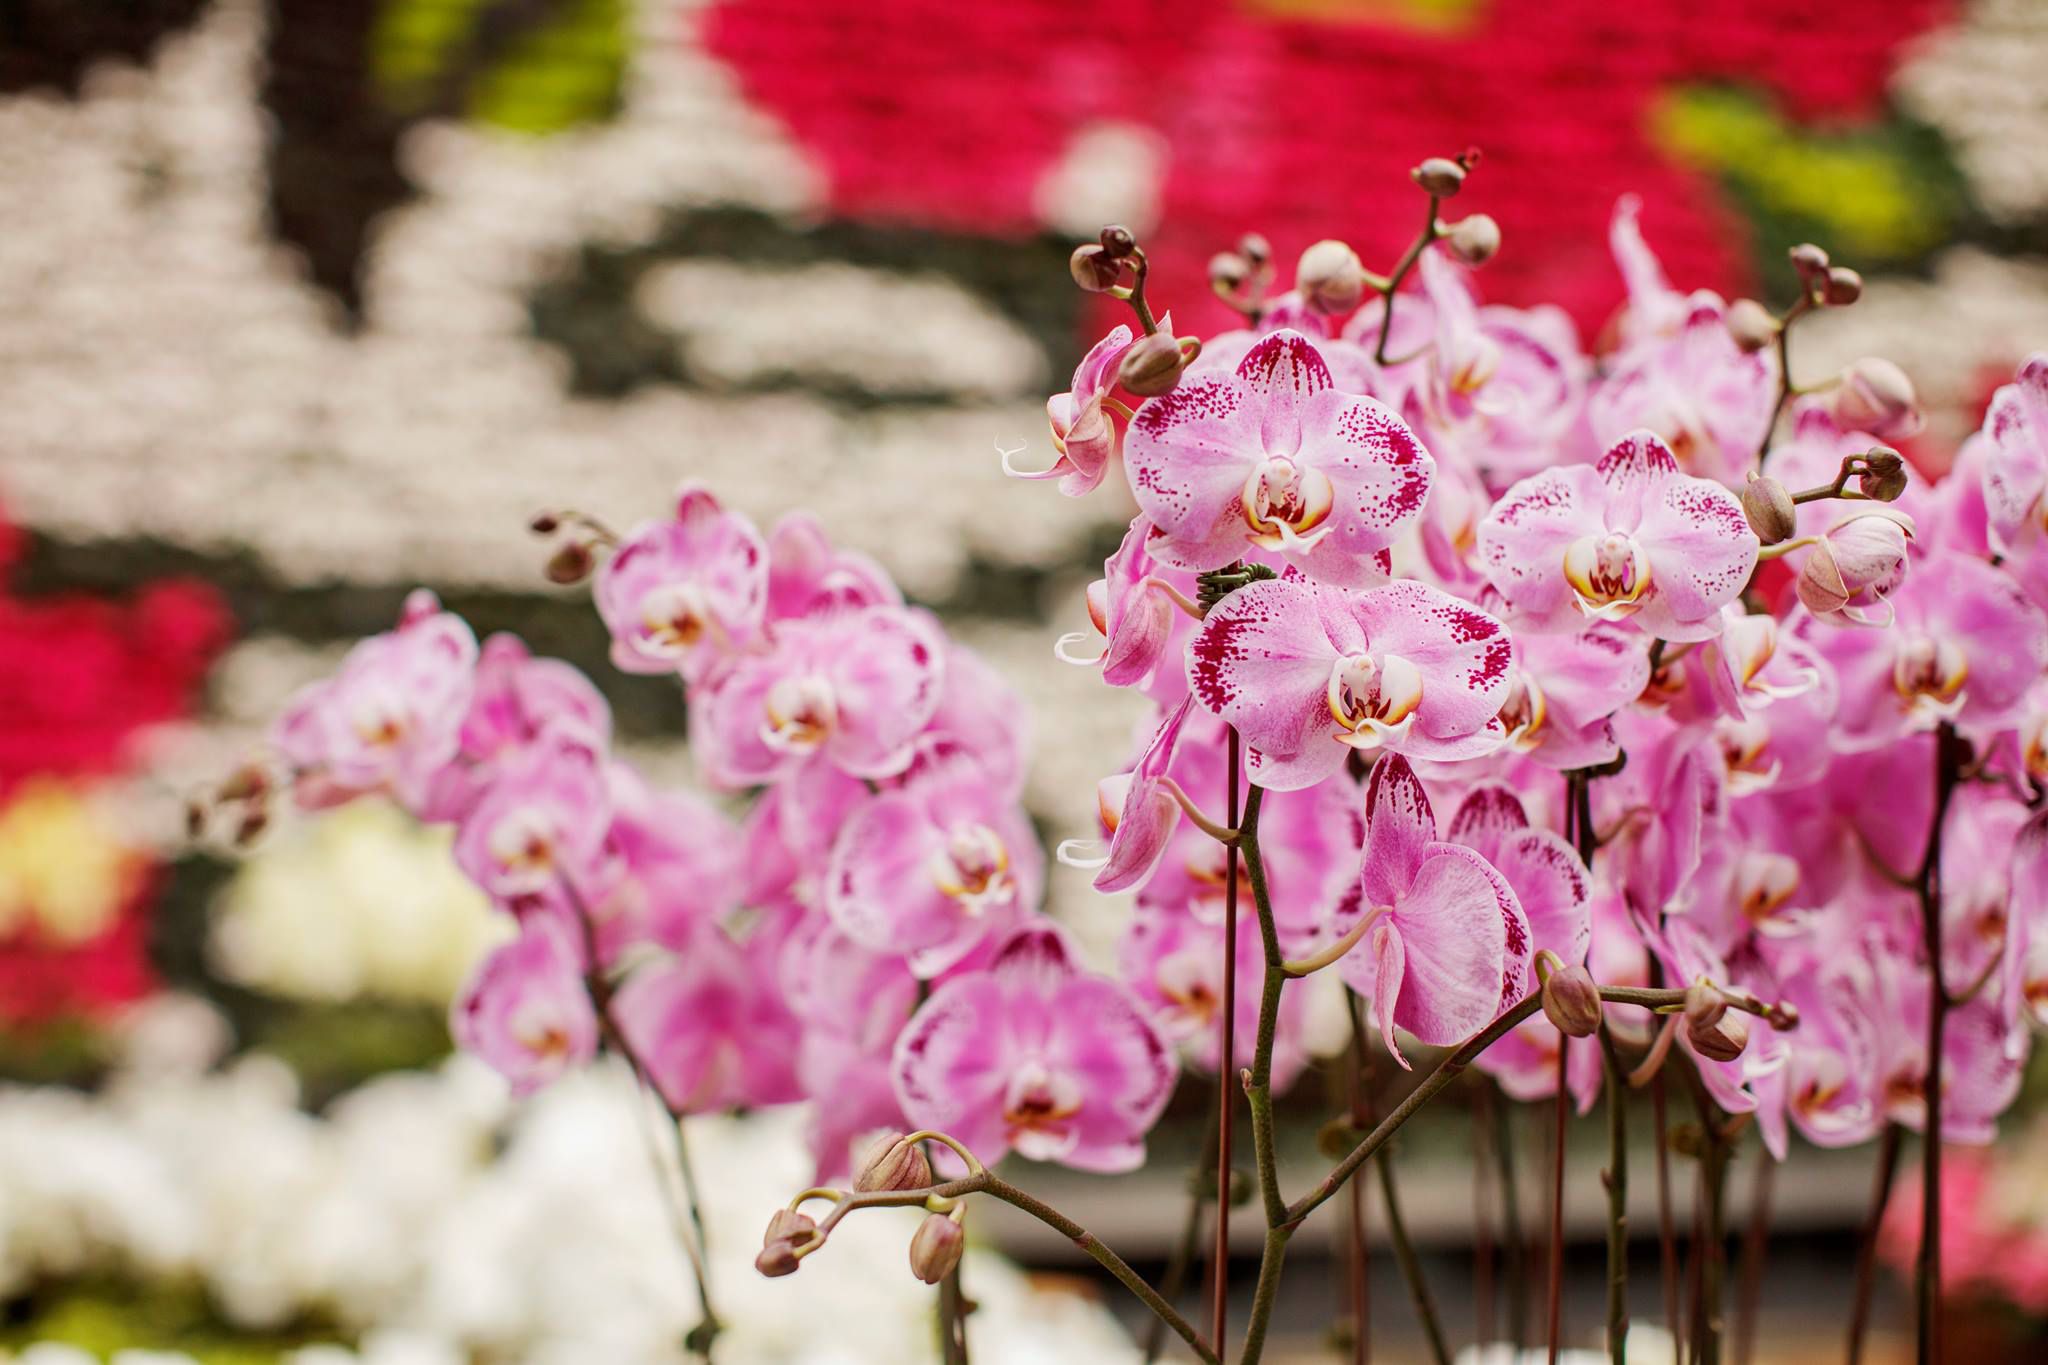 The Royal Botanic Garden is giving away thousands of plants for $1